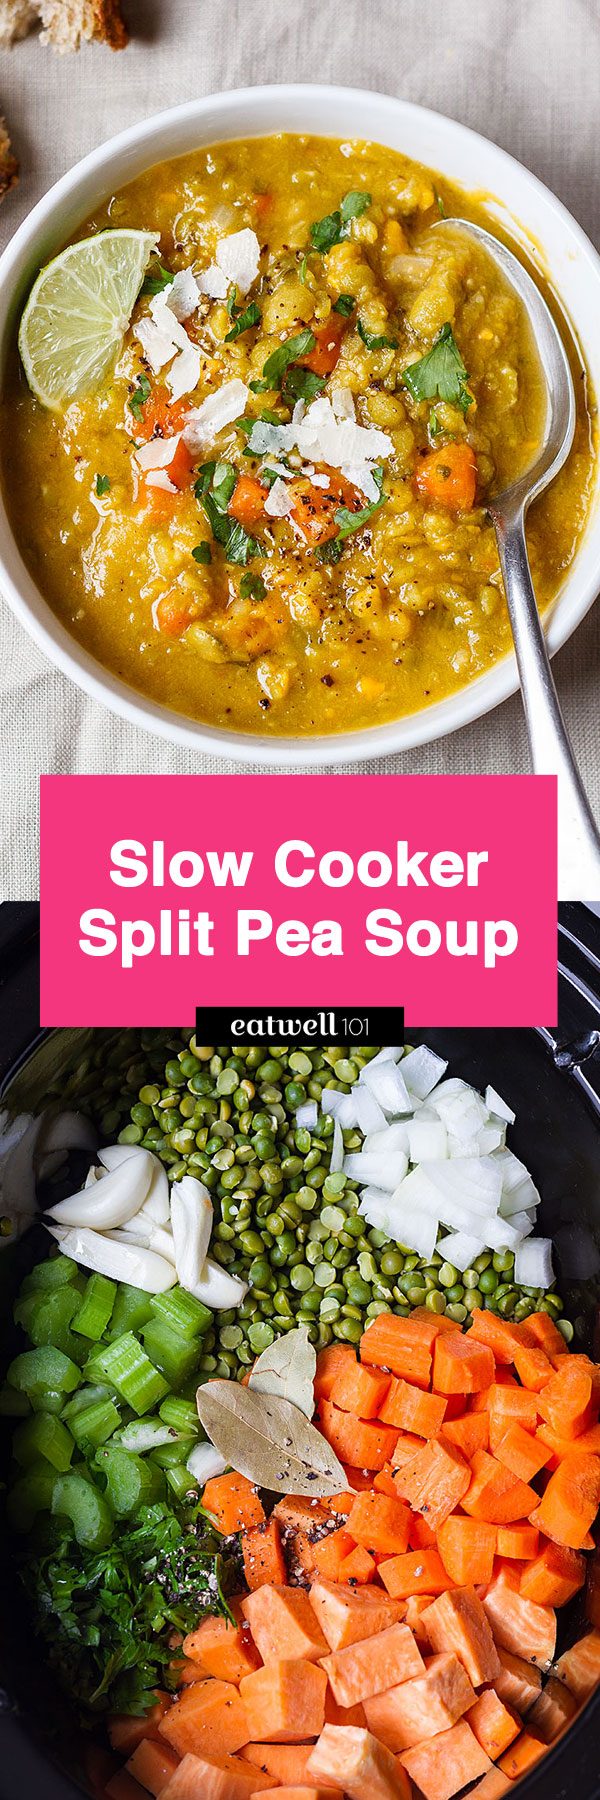 Slow Cooker Split Pea Soup - An easy, creamy soup with tons of flavor. Perfect for a vegan or vegetarian-friendly dinner!